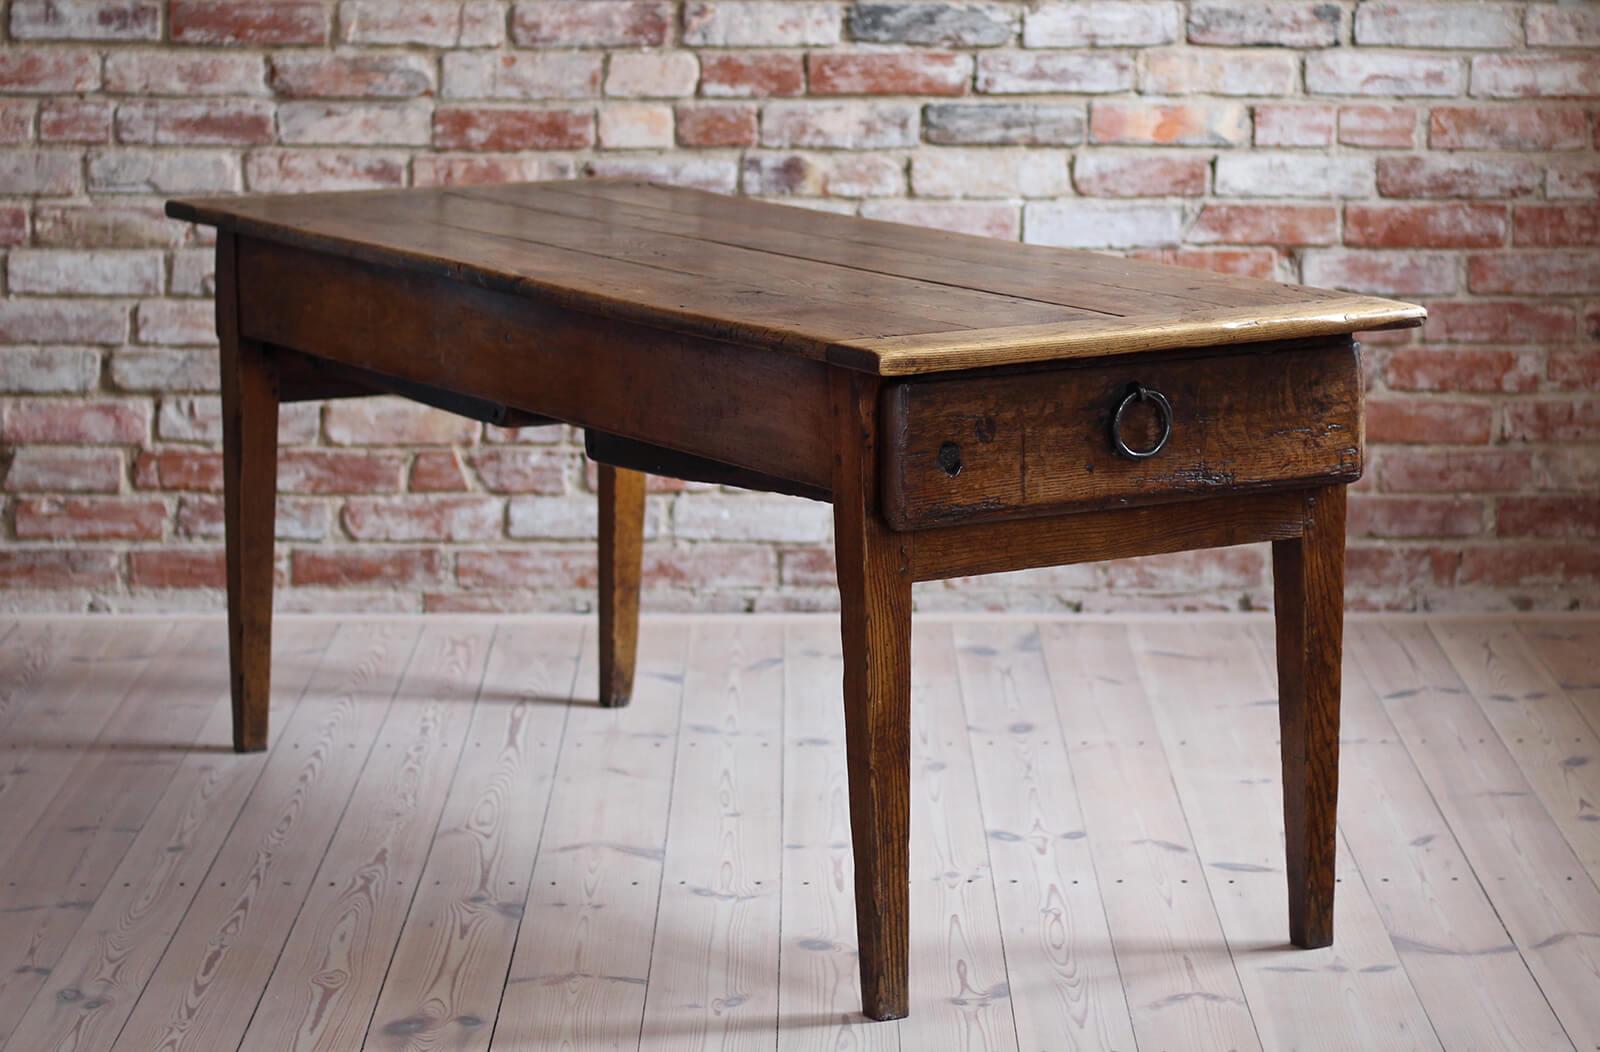 This gorgeous antique table was probably made in late 18th / Early 19th Century. It is made of elm wood. Two practical drawers reside in the table’s apron that allow for storage. Four wide elm boards comprise the table’s top. The piece was gently